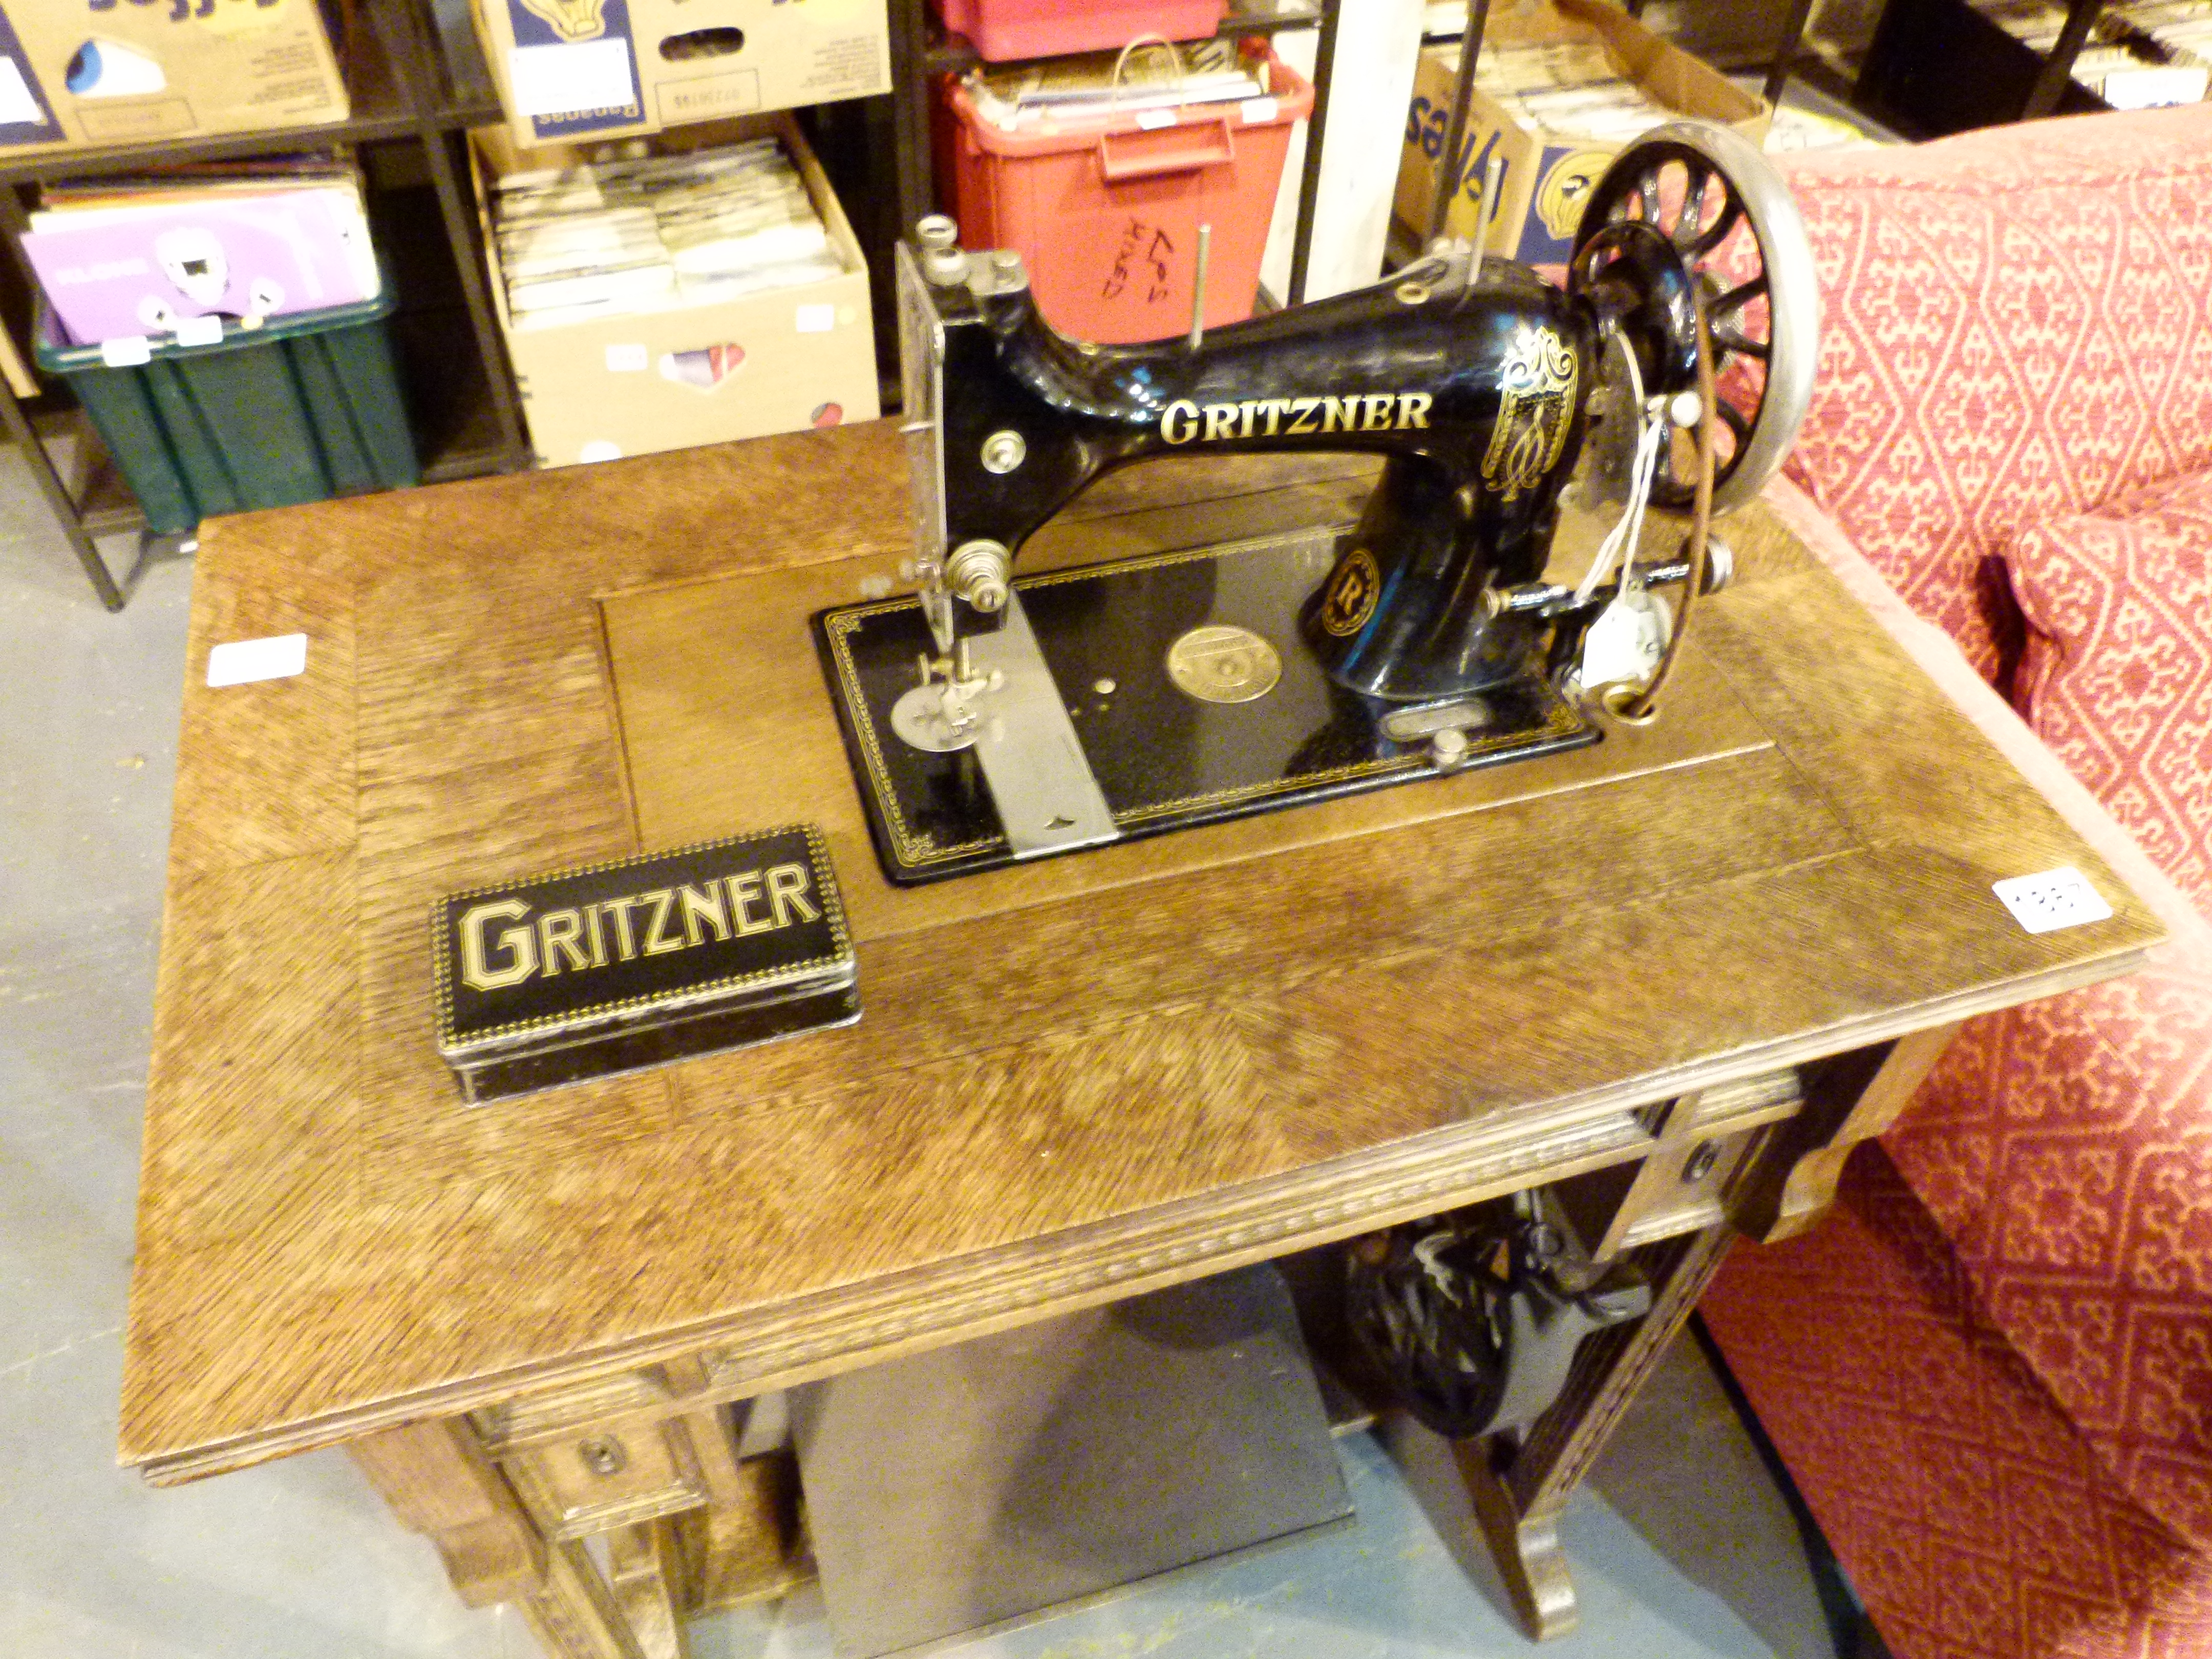 Gritzner treadle sewing machine and a Gr - Image 2 of 5